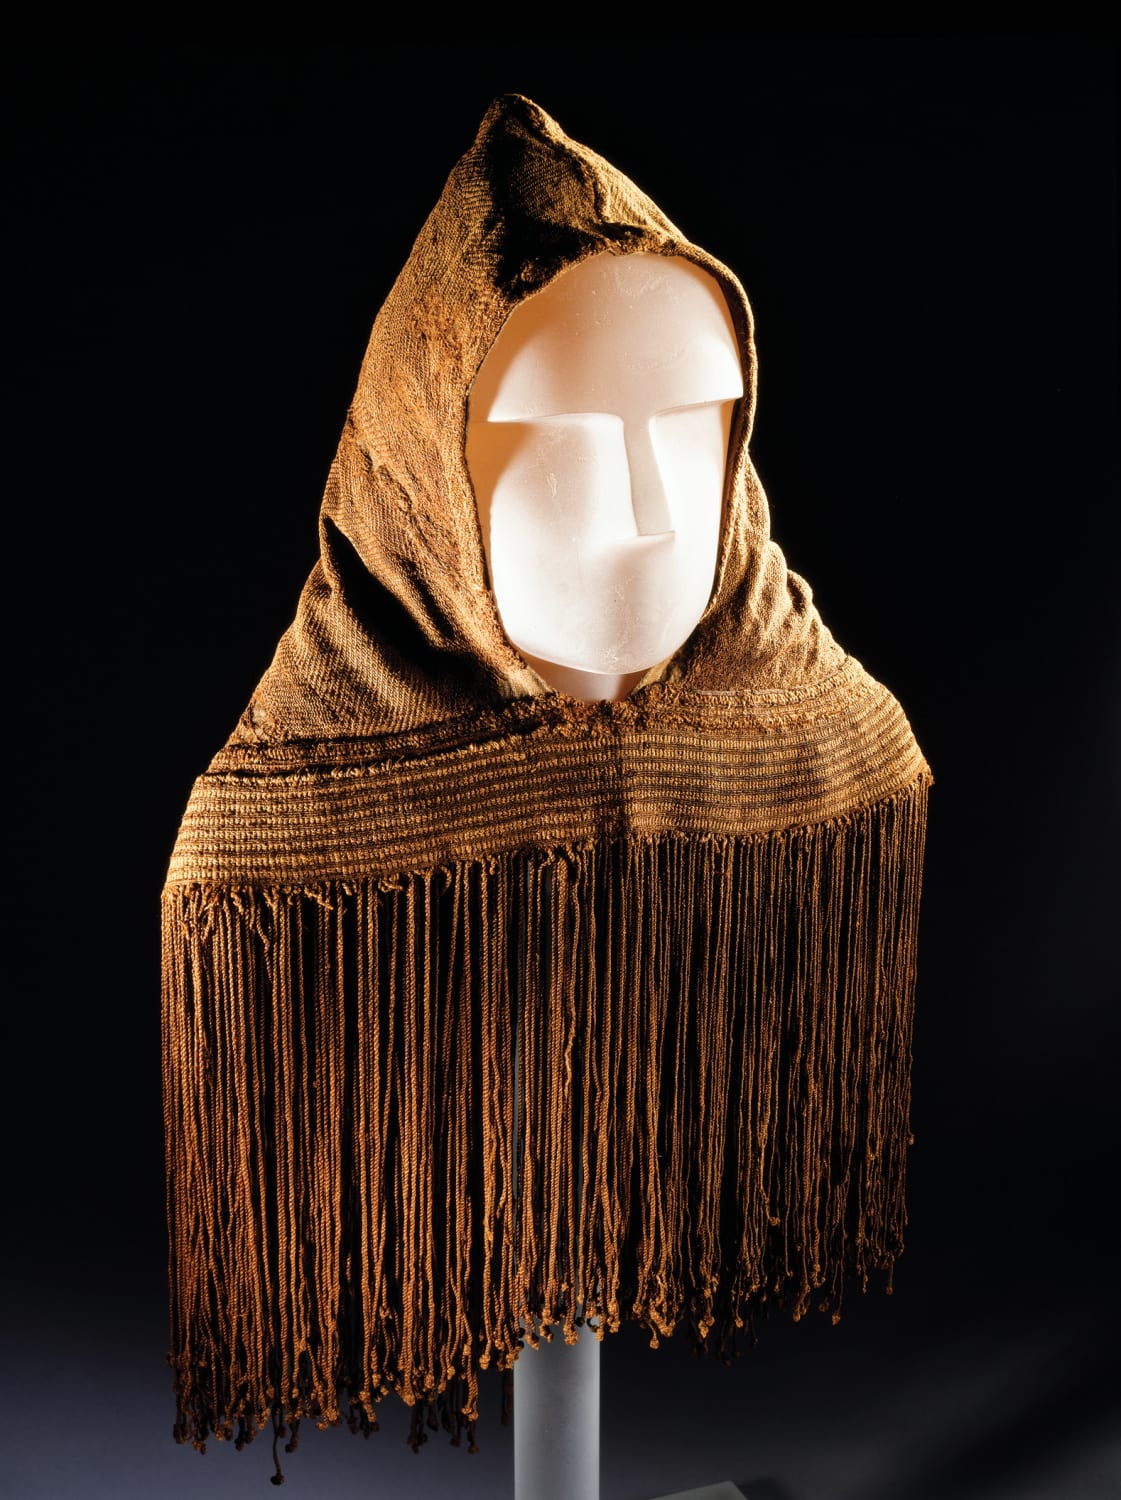 The Orkney Hood, found in a peat bog in 1867, is the only complete item of fabric clothing to have survived from early medieval Scotland. 250-615 CE, now on display at the National Museum of Scotland